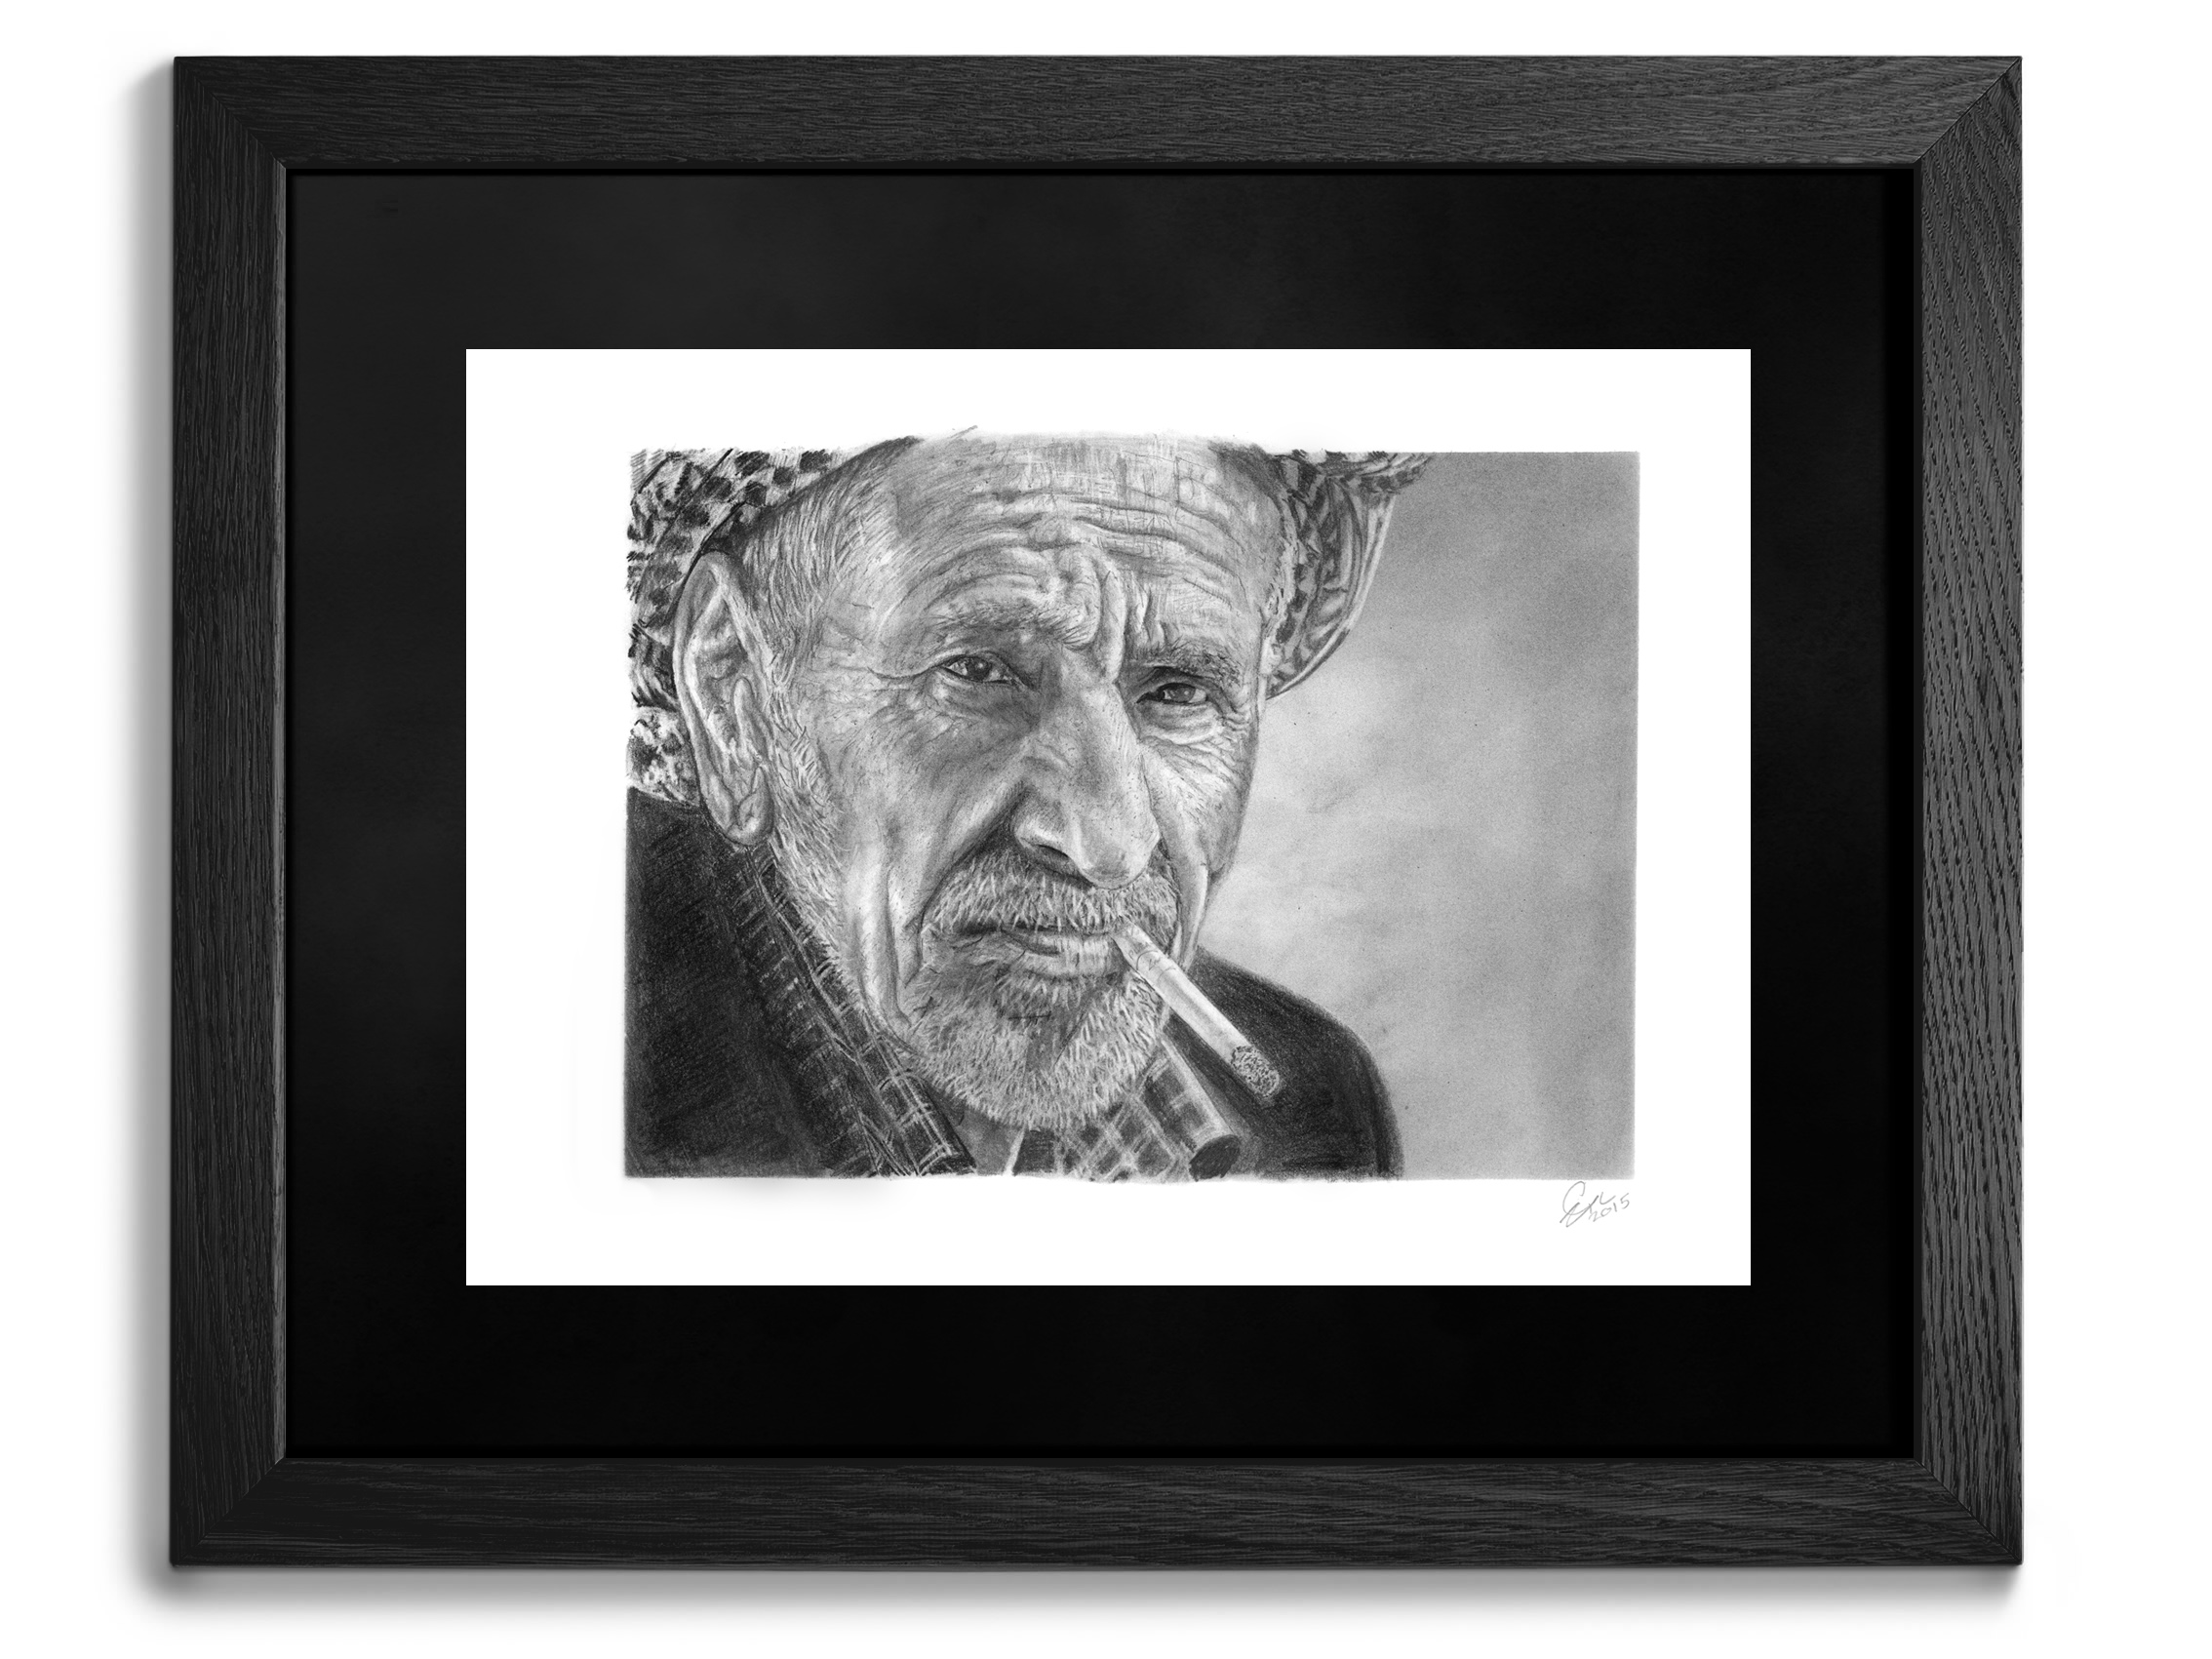 Original Pencil Drawings for sale. Animals and Portraits. Harrogate